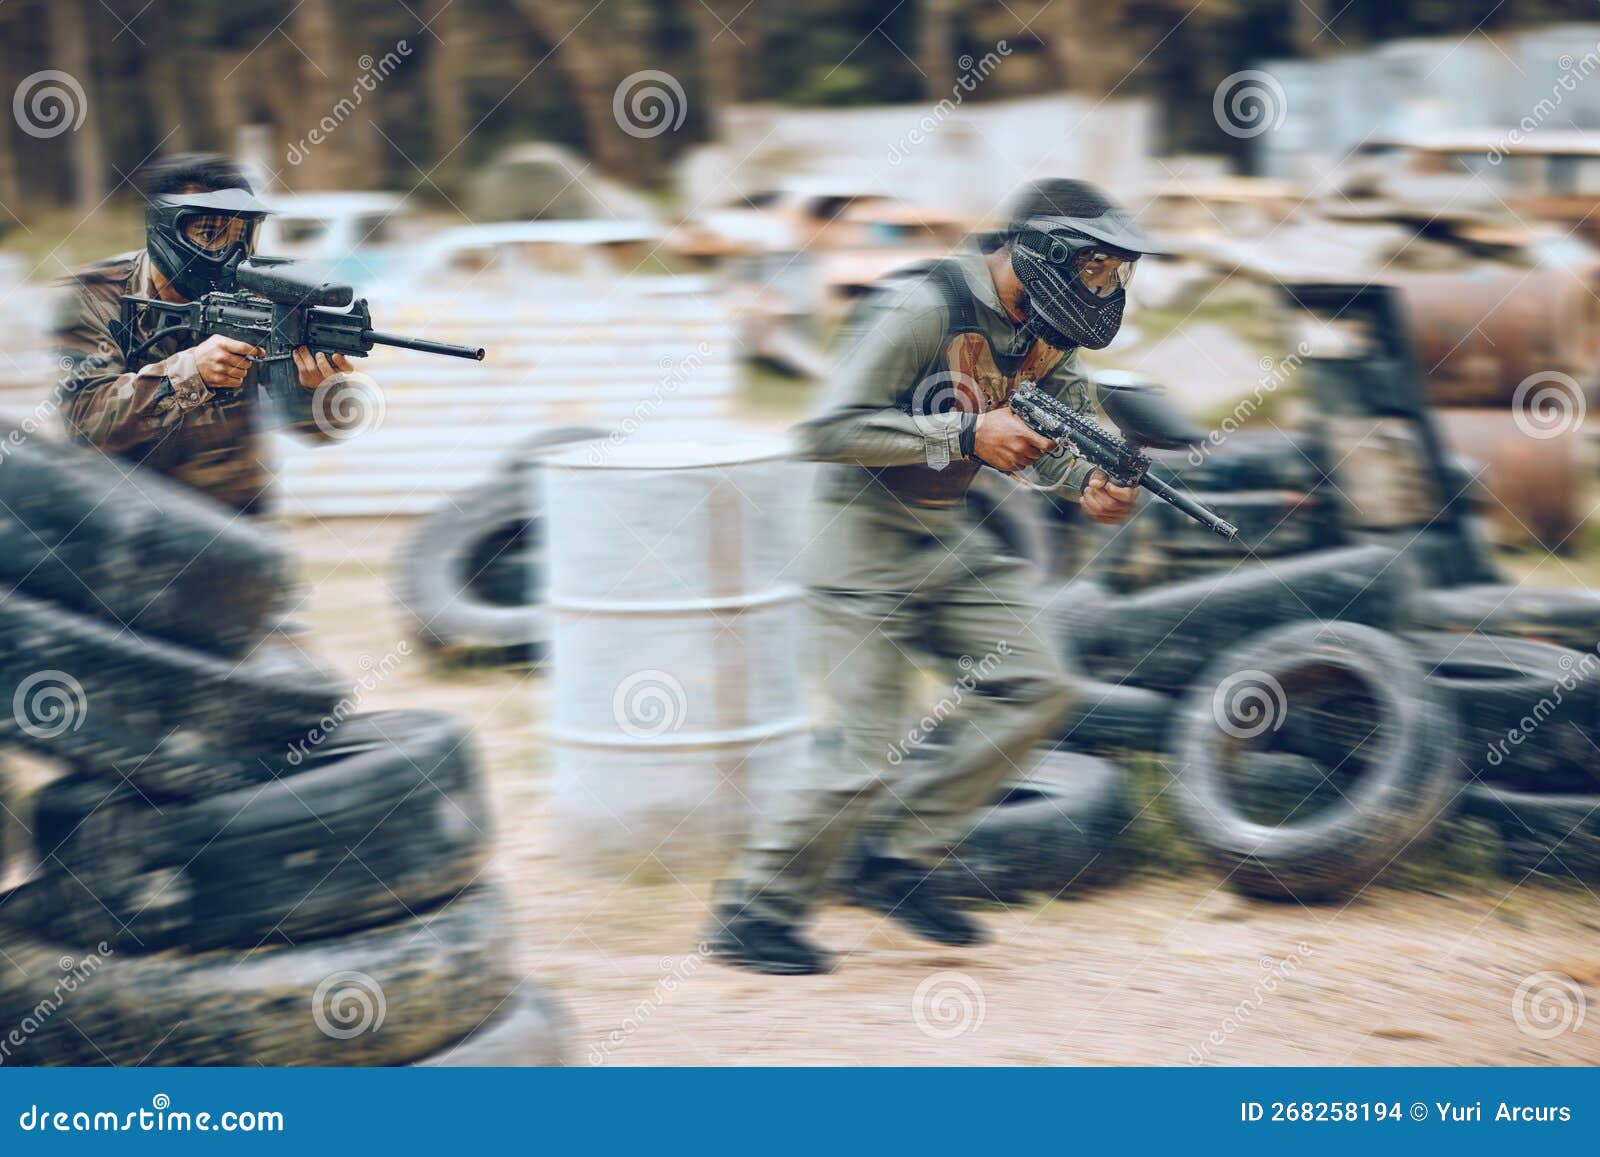 Paintball, Running or Men in a Shooting Game Playing with Speed or Fast Action on a Battlefield